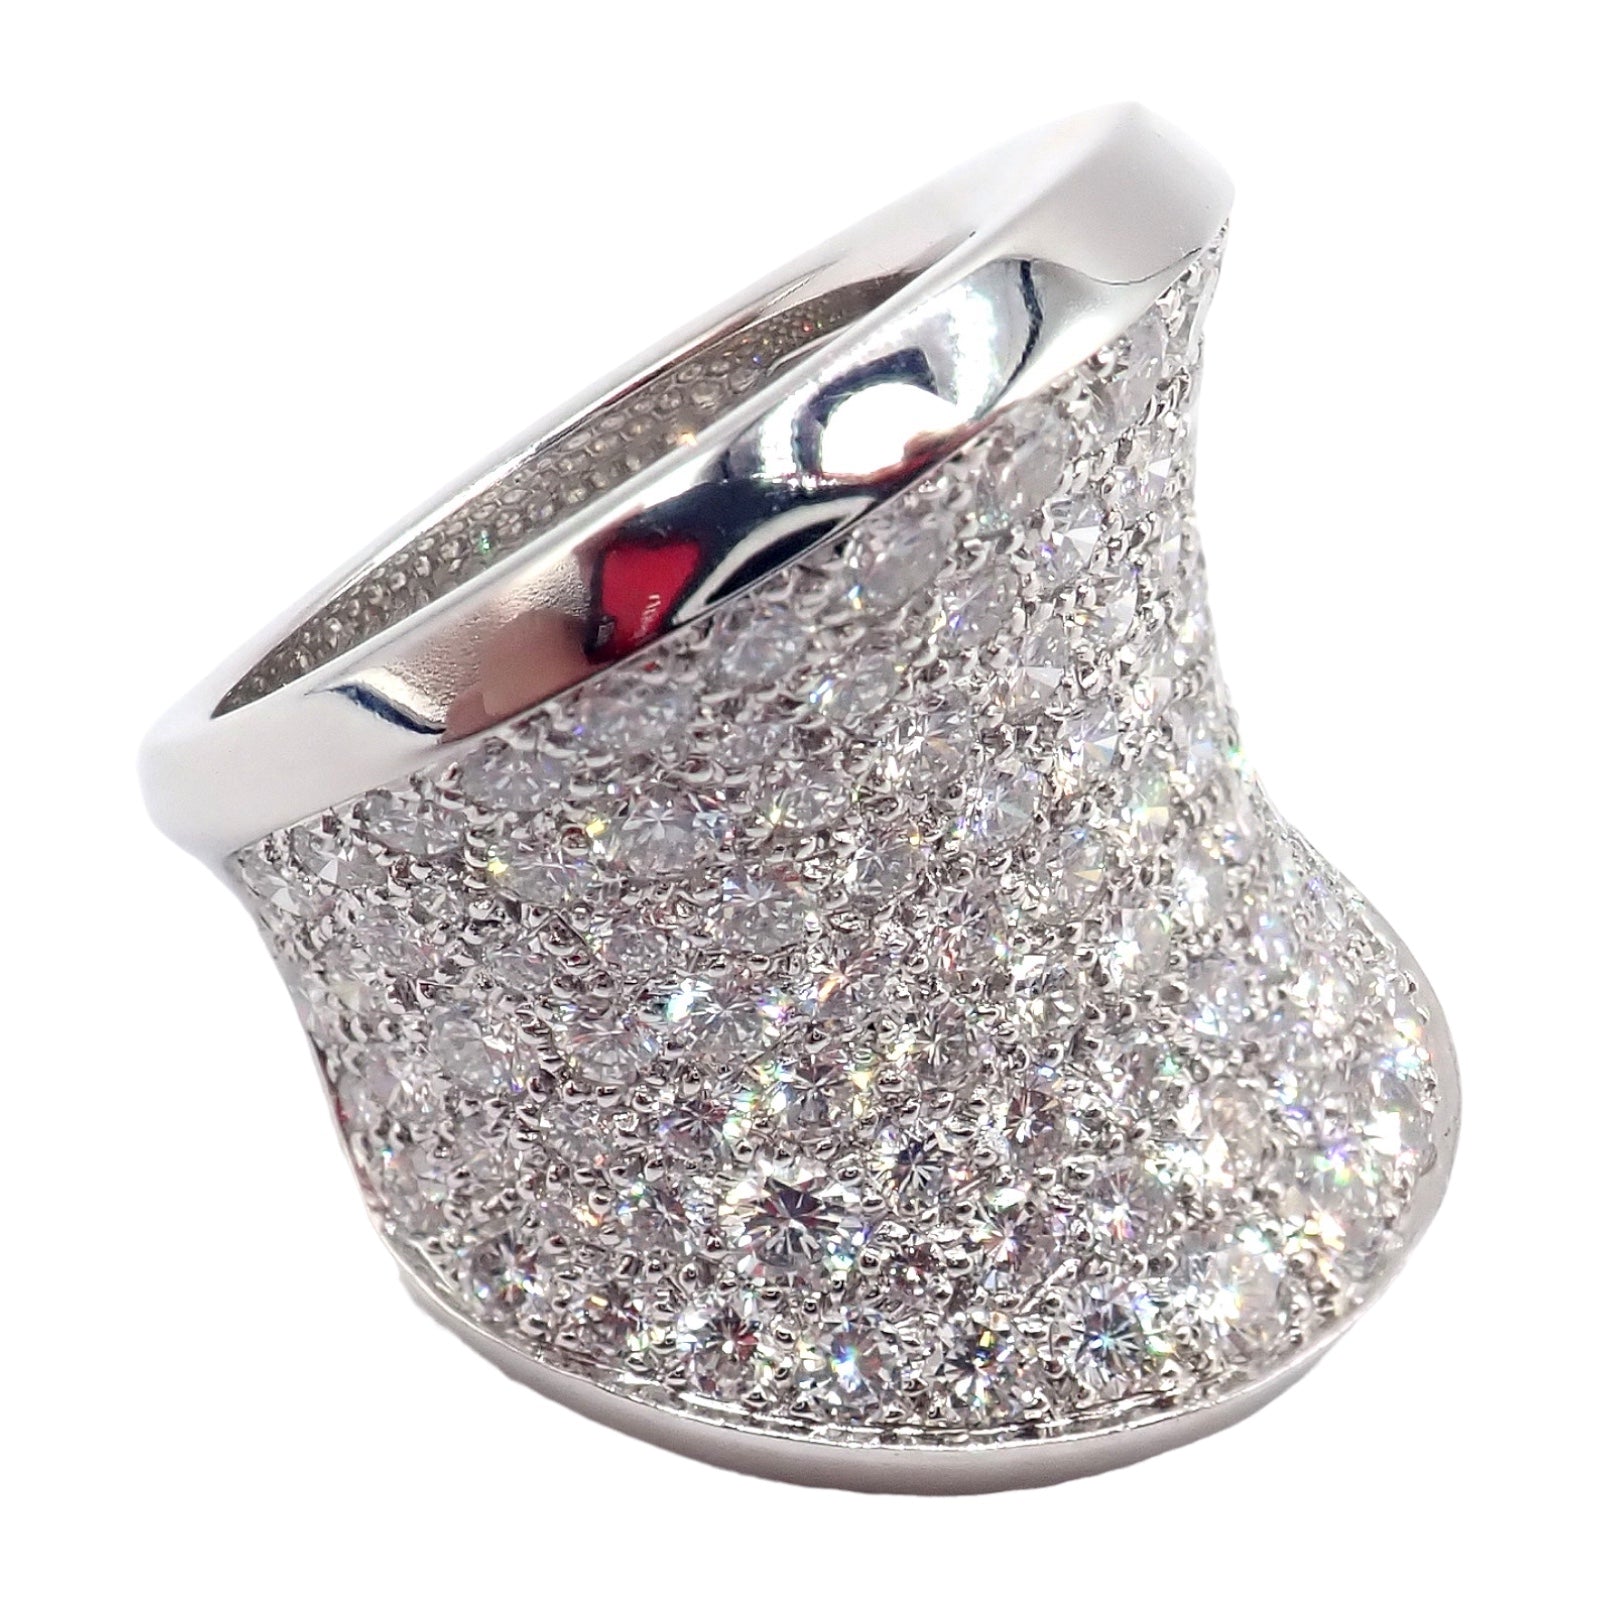 Cartier Jewelry & Watches:Fine Jewelry:Rings Cartier Chalice 18k White Gold Diamond Large Ring Paper